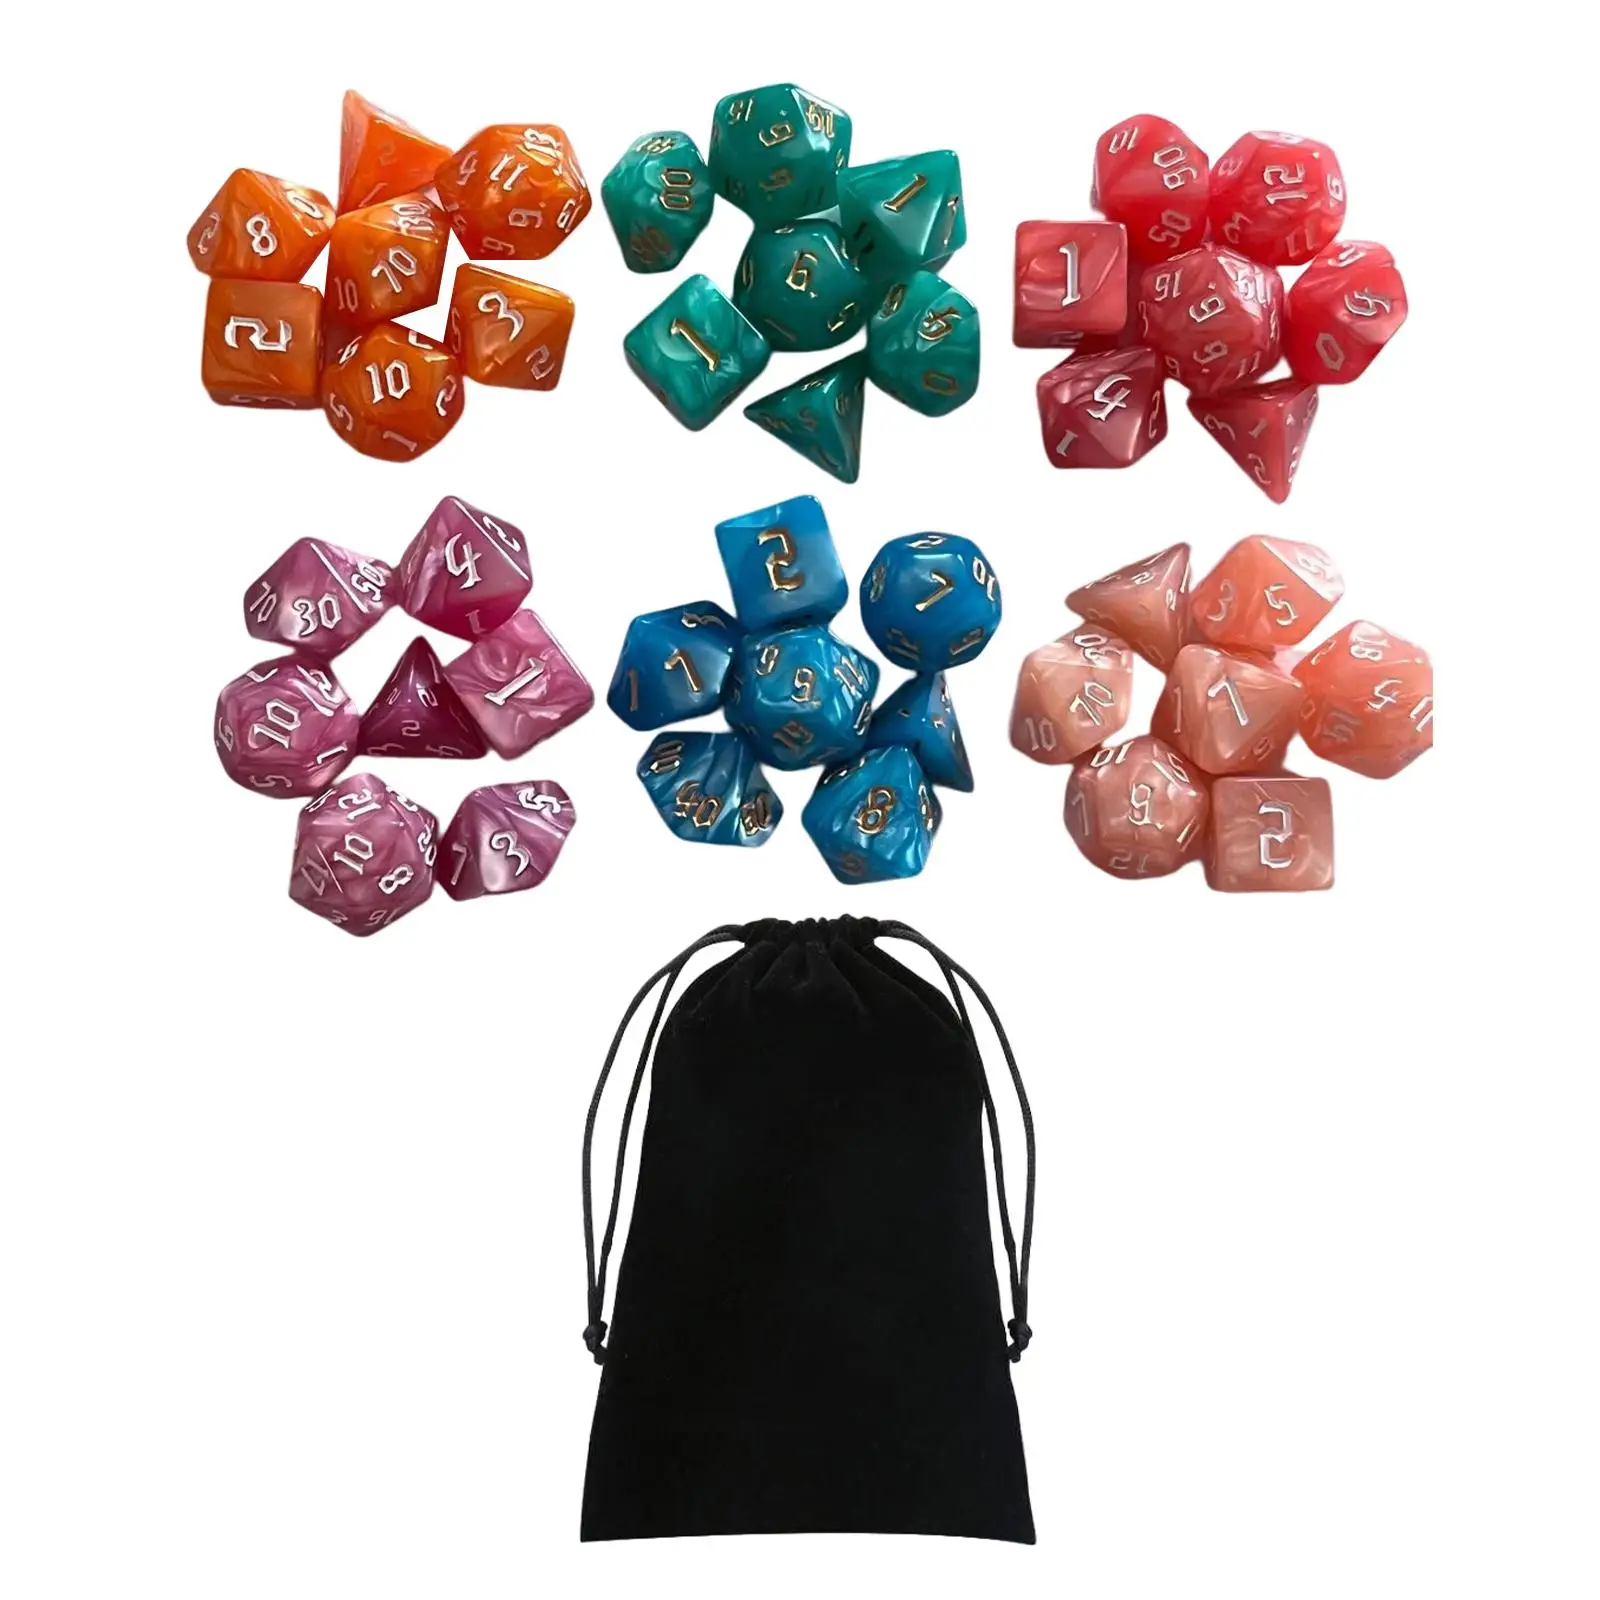 42x Polyhedral Dices Colored Party Favors Rolling Dices Game Dices for KTV